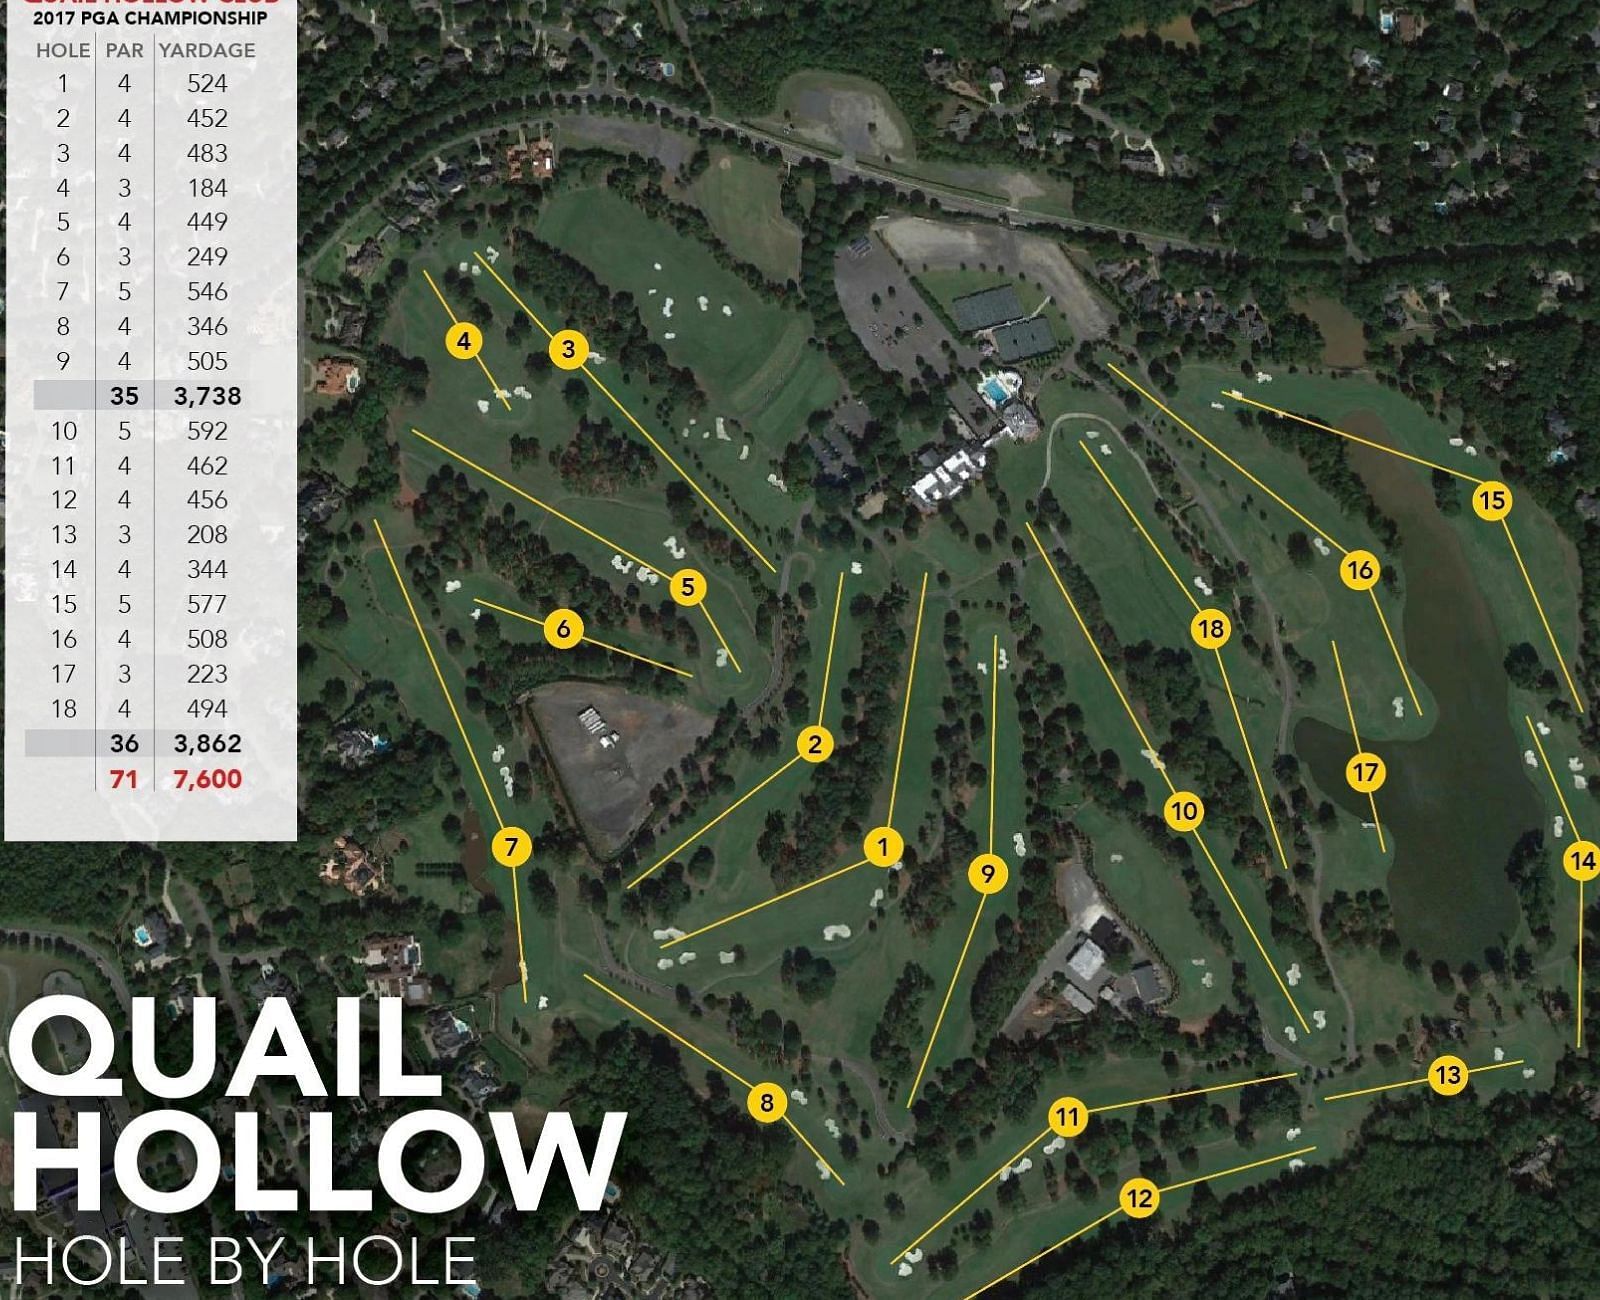 The course map for Quail Hollow Club (Image via Golf Weekly)